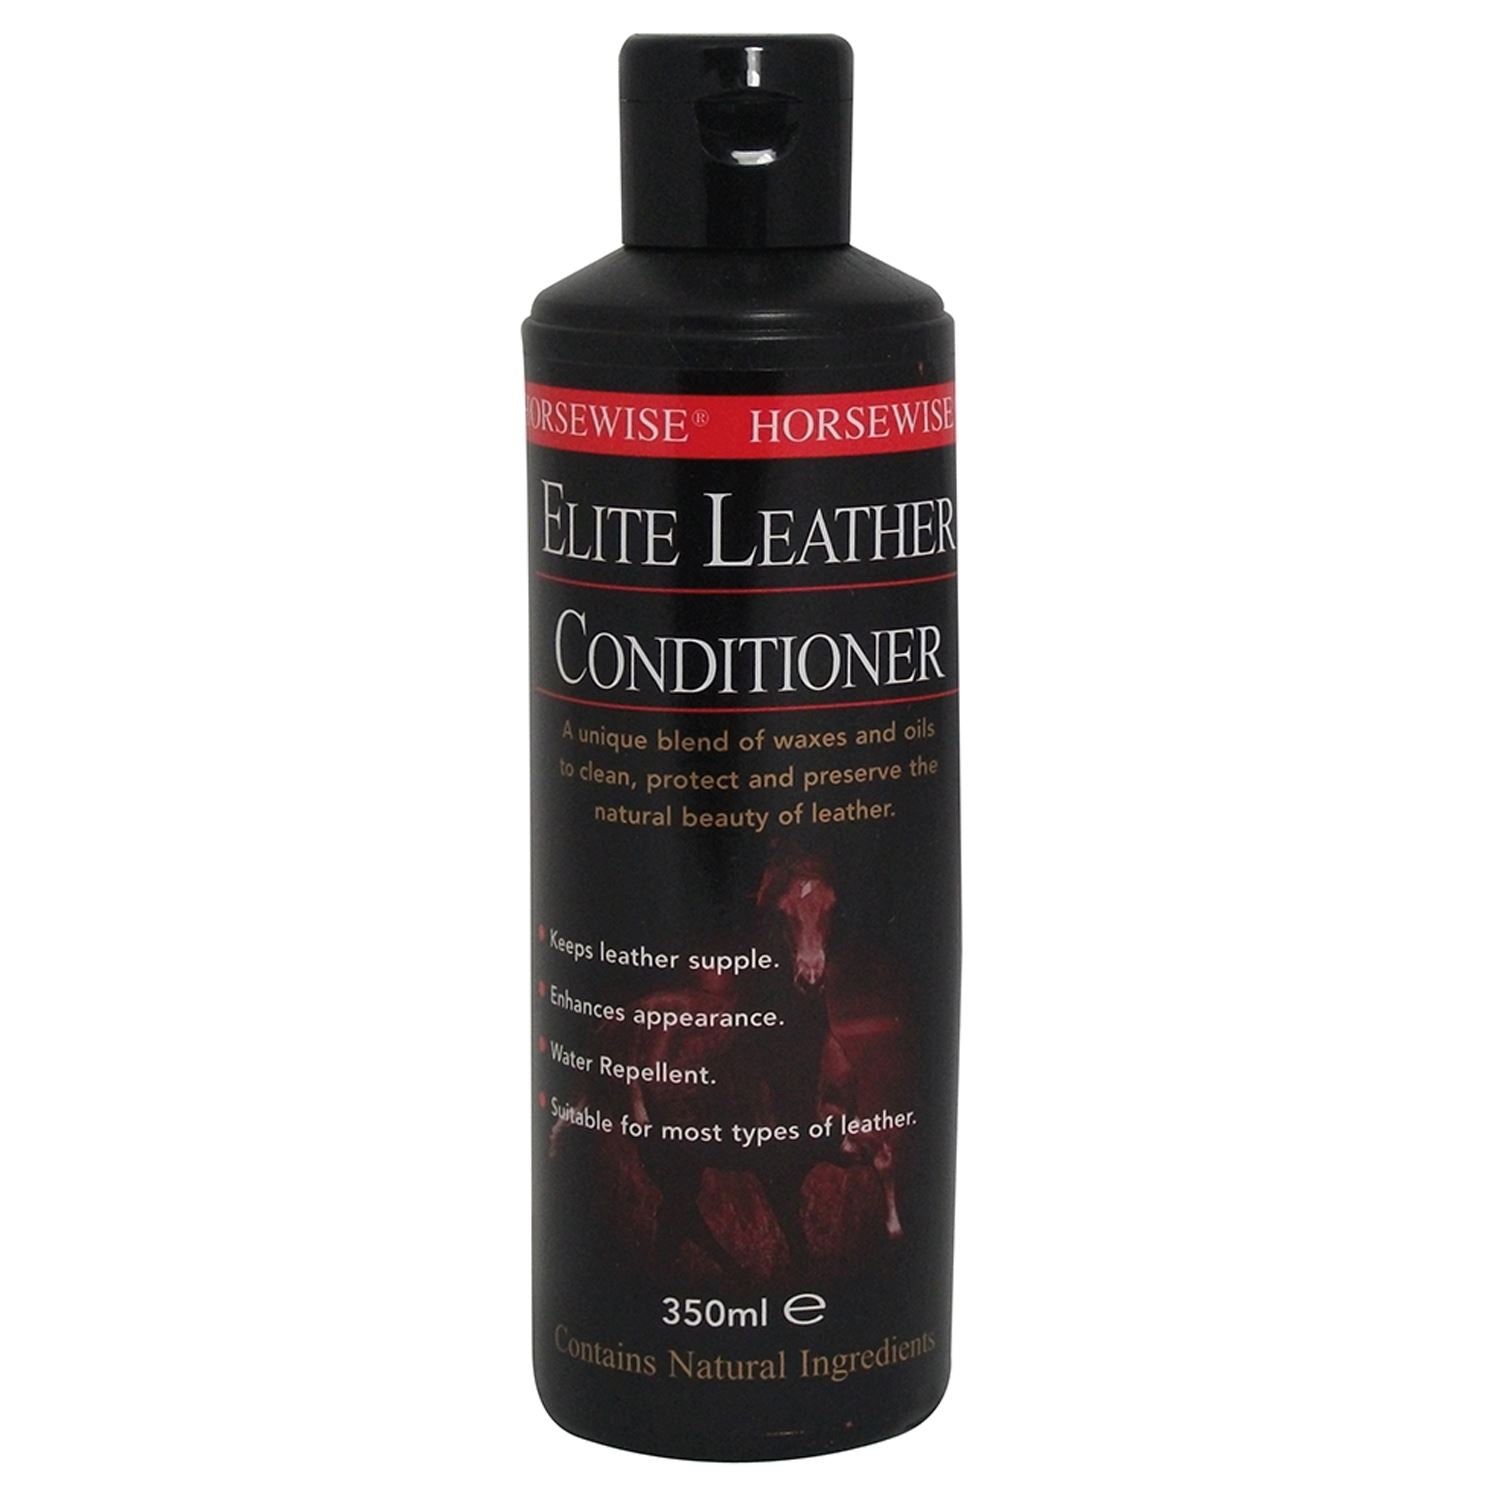 Horsewise Elite Leather Conditioner - Just Horse Riders